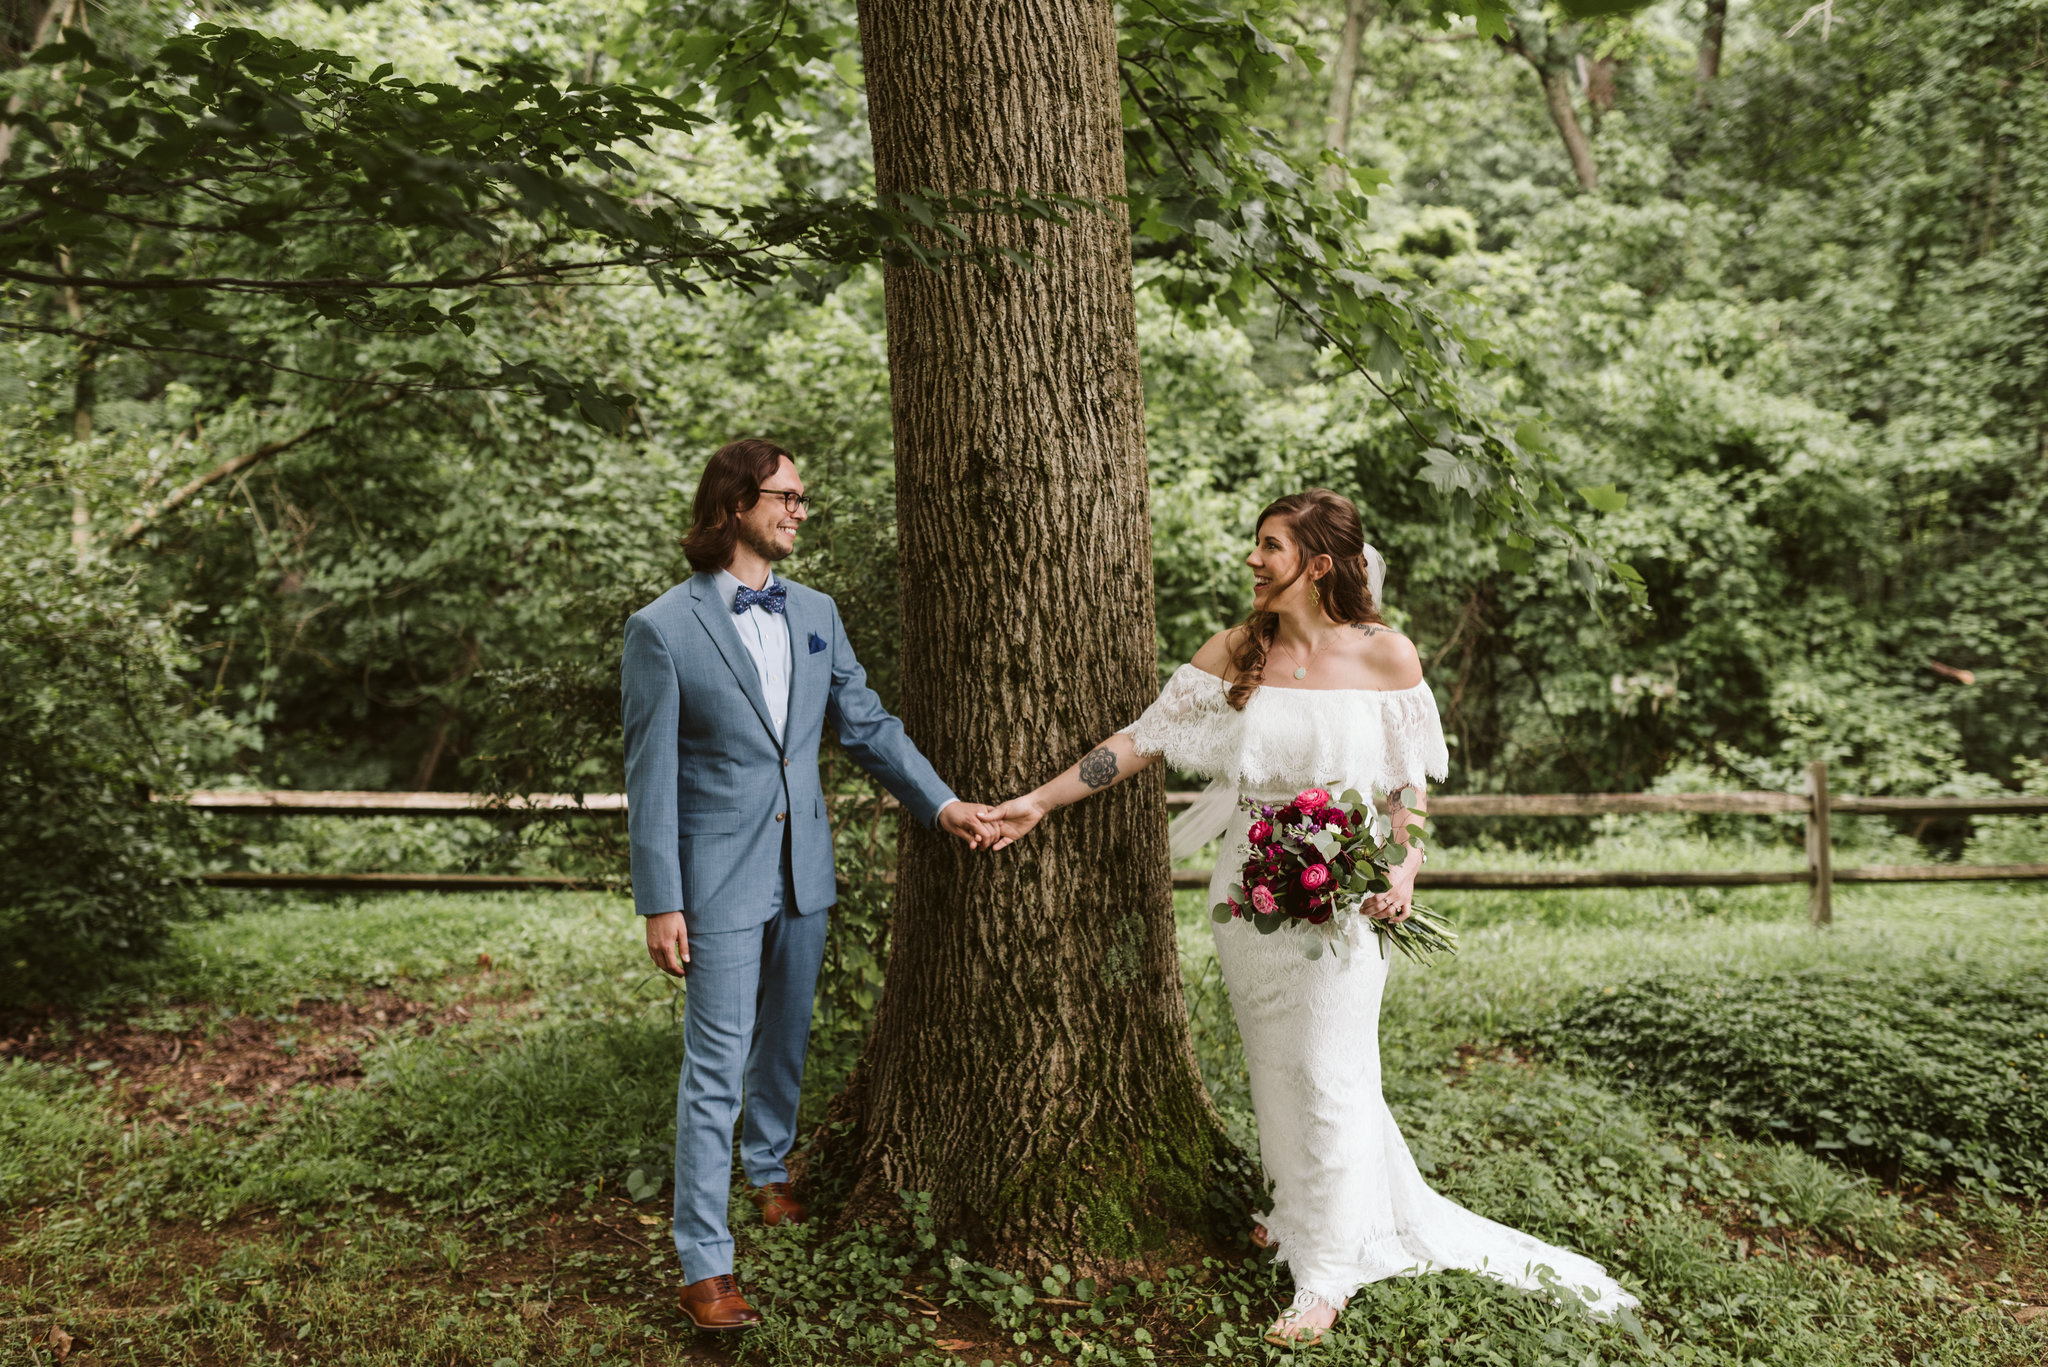  Annapolis, Quaker Wedding, Maryland Wedding Photographer, Intimate, Small Wedding, Vintage, DIY, Bride and groom Holding Hands by Tree 